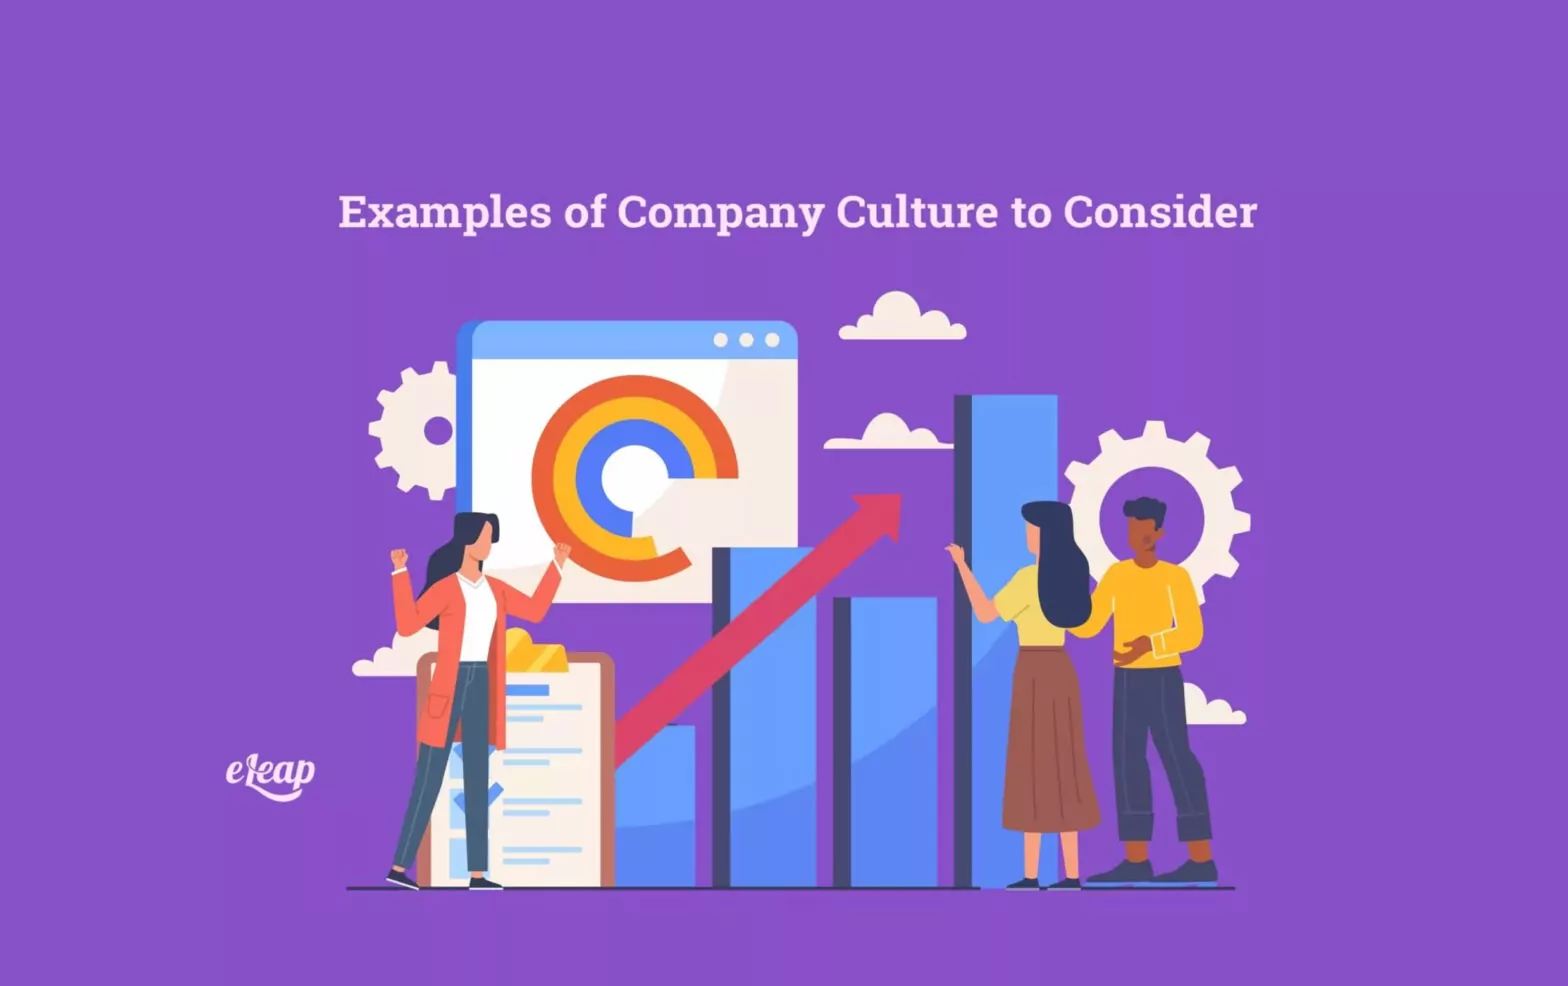 Examples of Company Culture to Consider